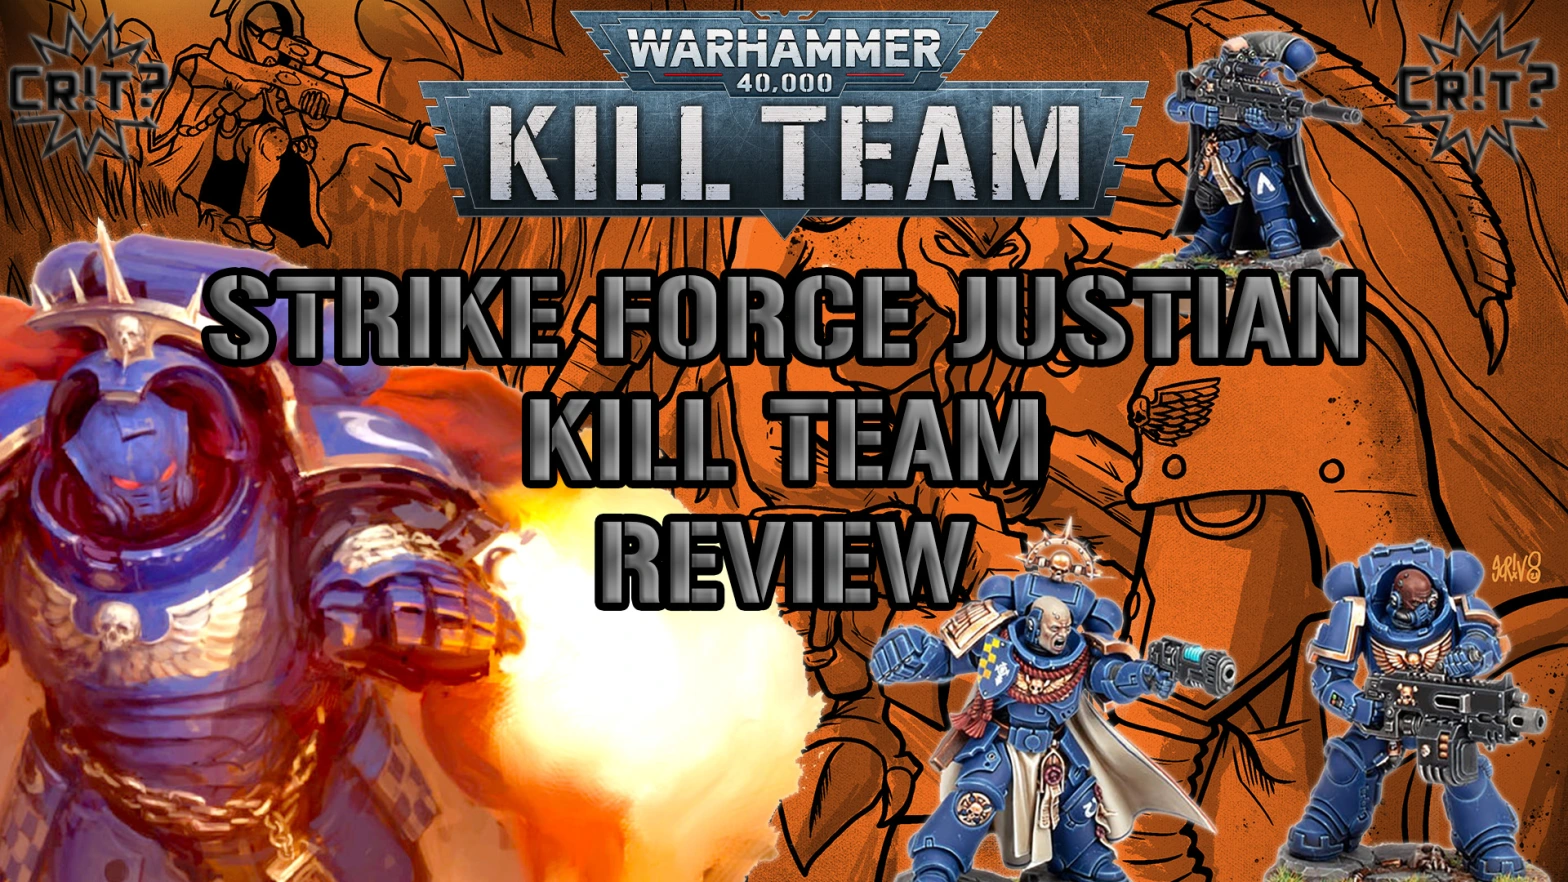 Strike Force Justian Kill Team Review – Can You Roll A Crit?